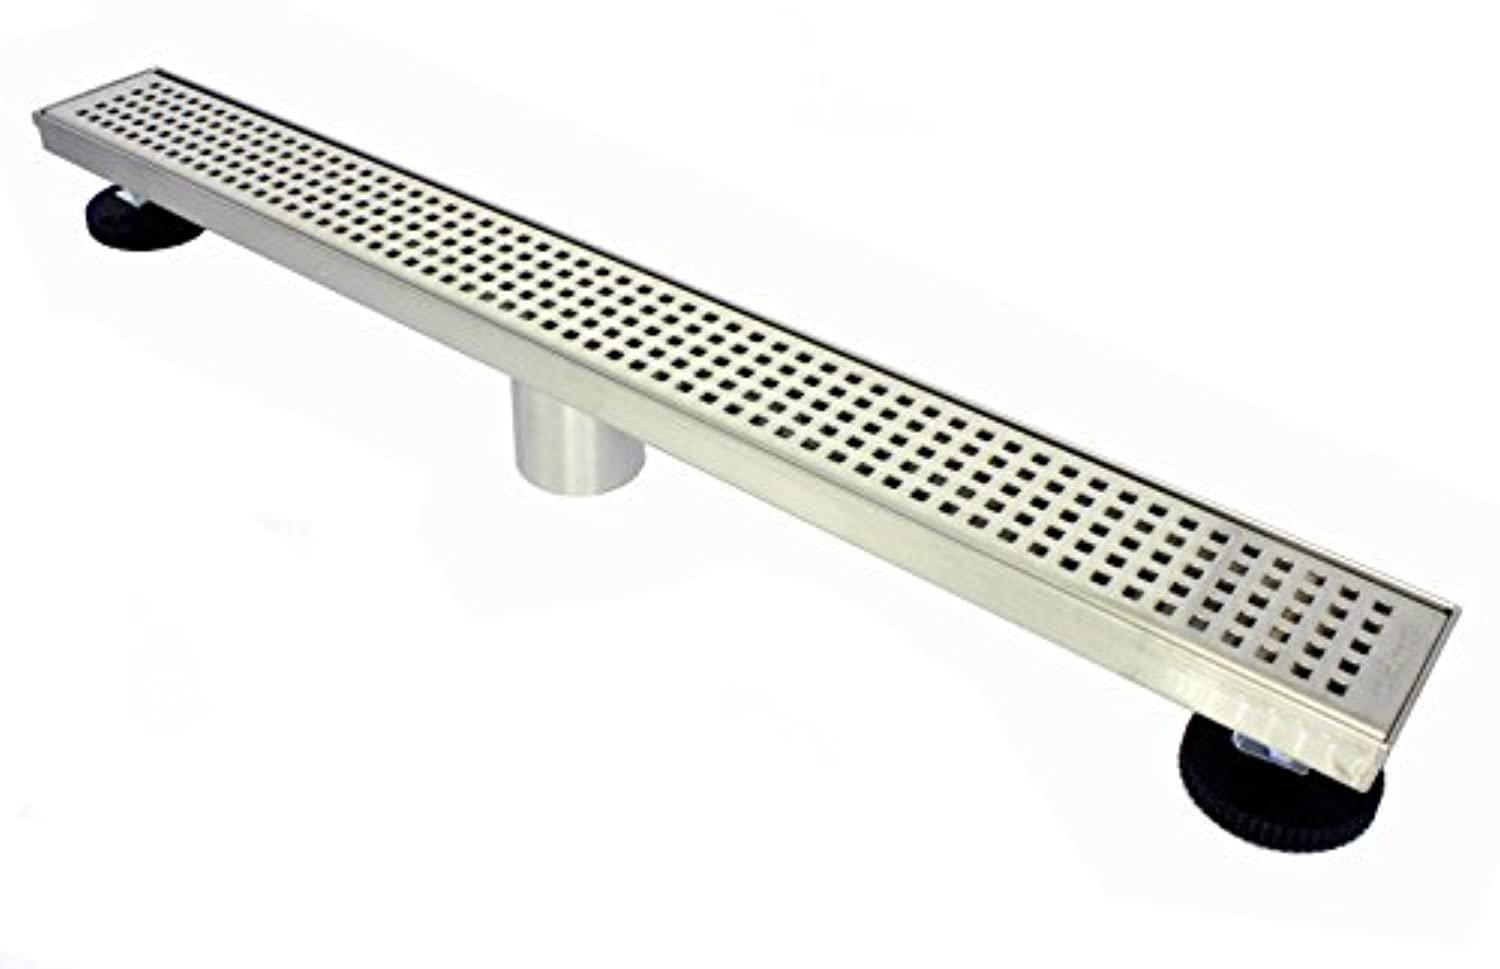 Designline 36 in. Stainless Steel Linear Shower Drain with Tile-In Pattern  Drain Cover